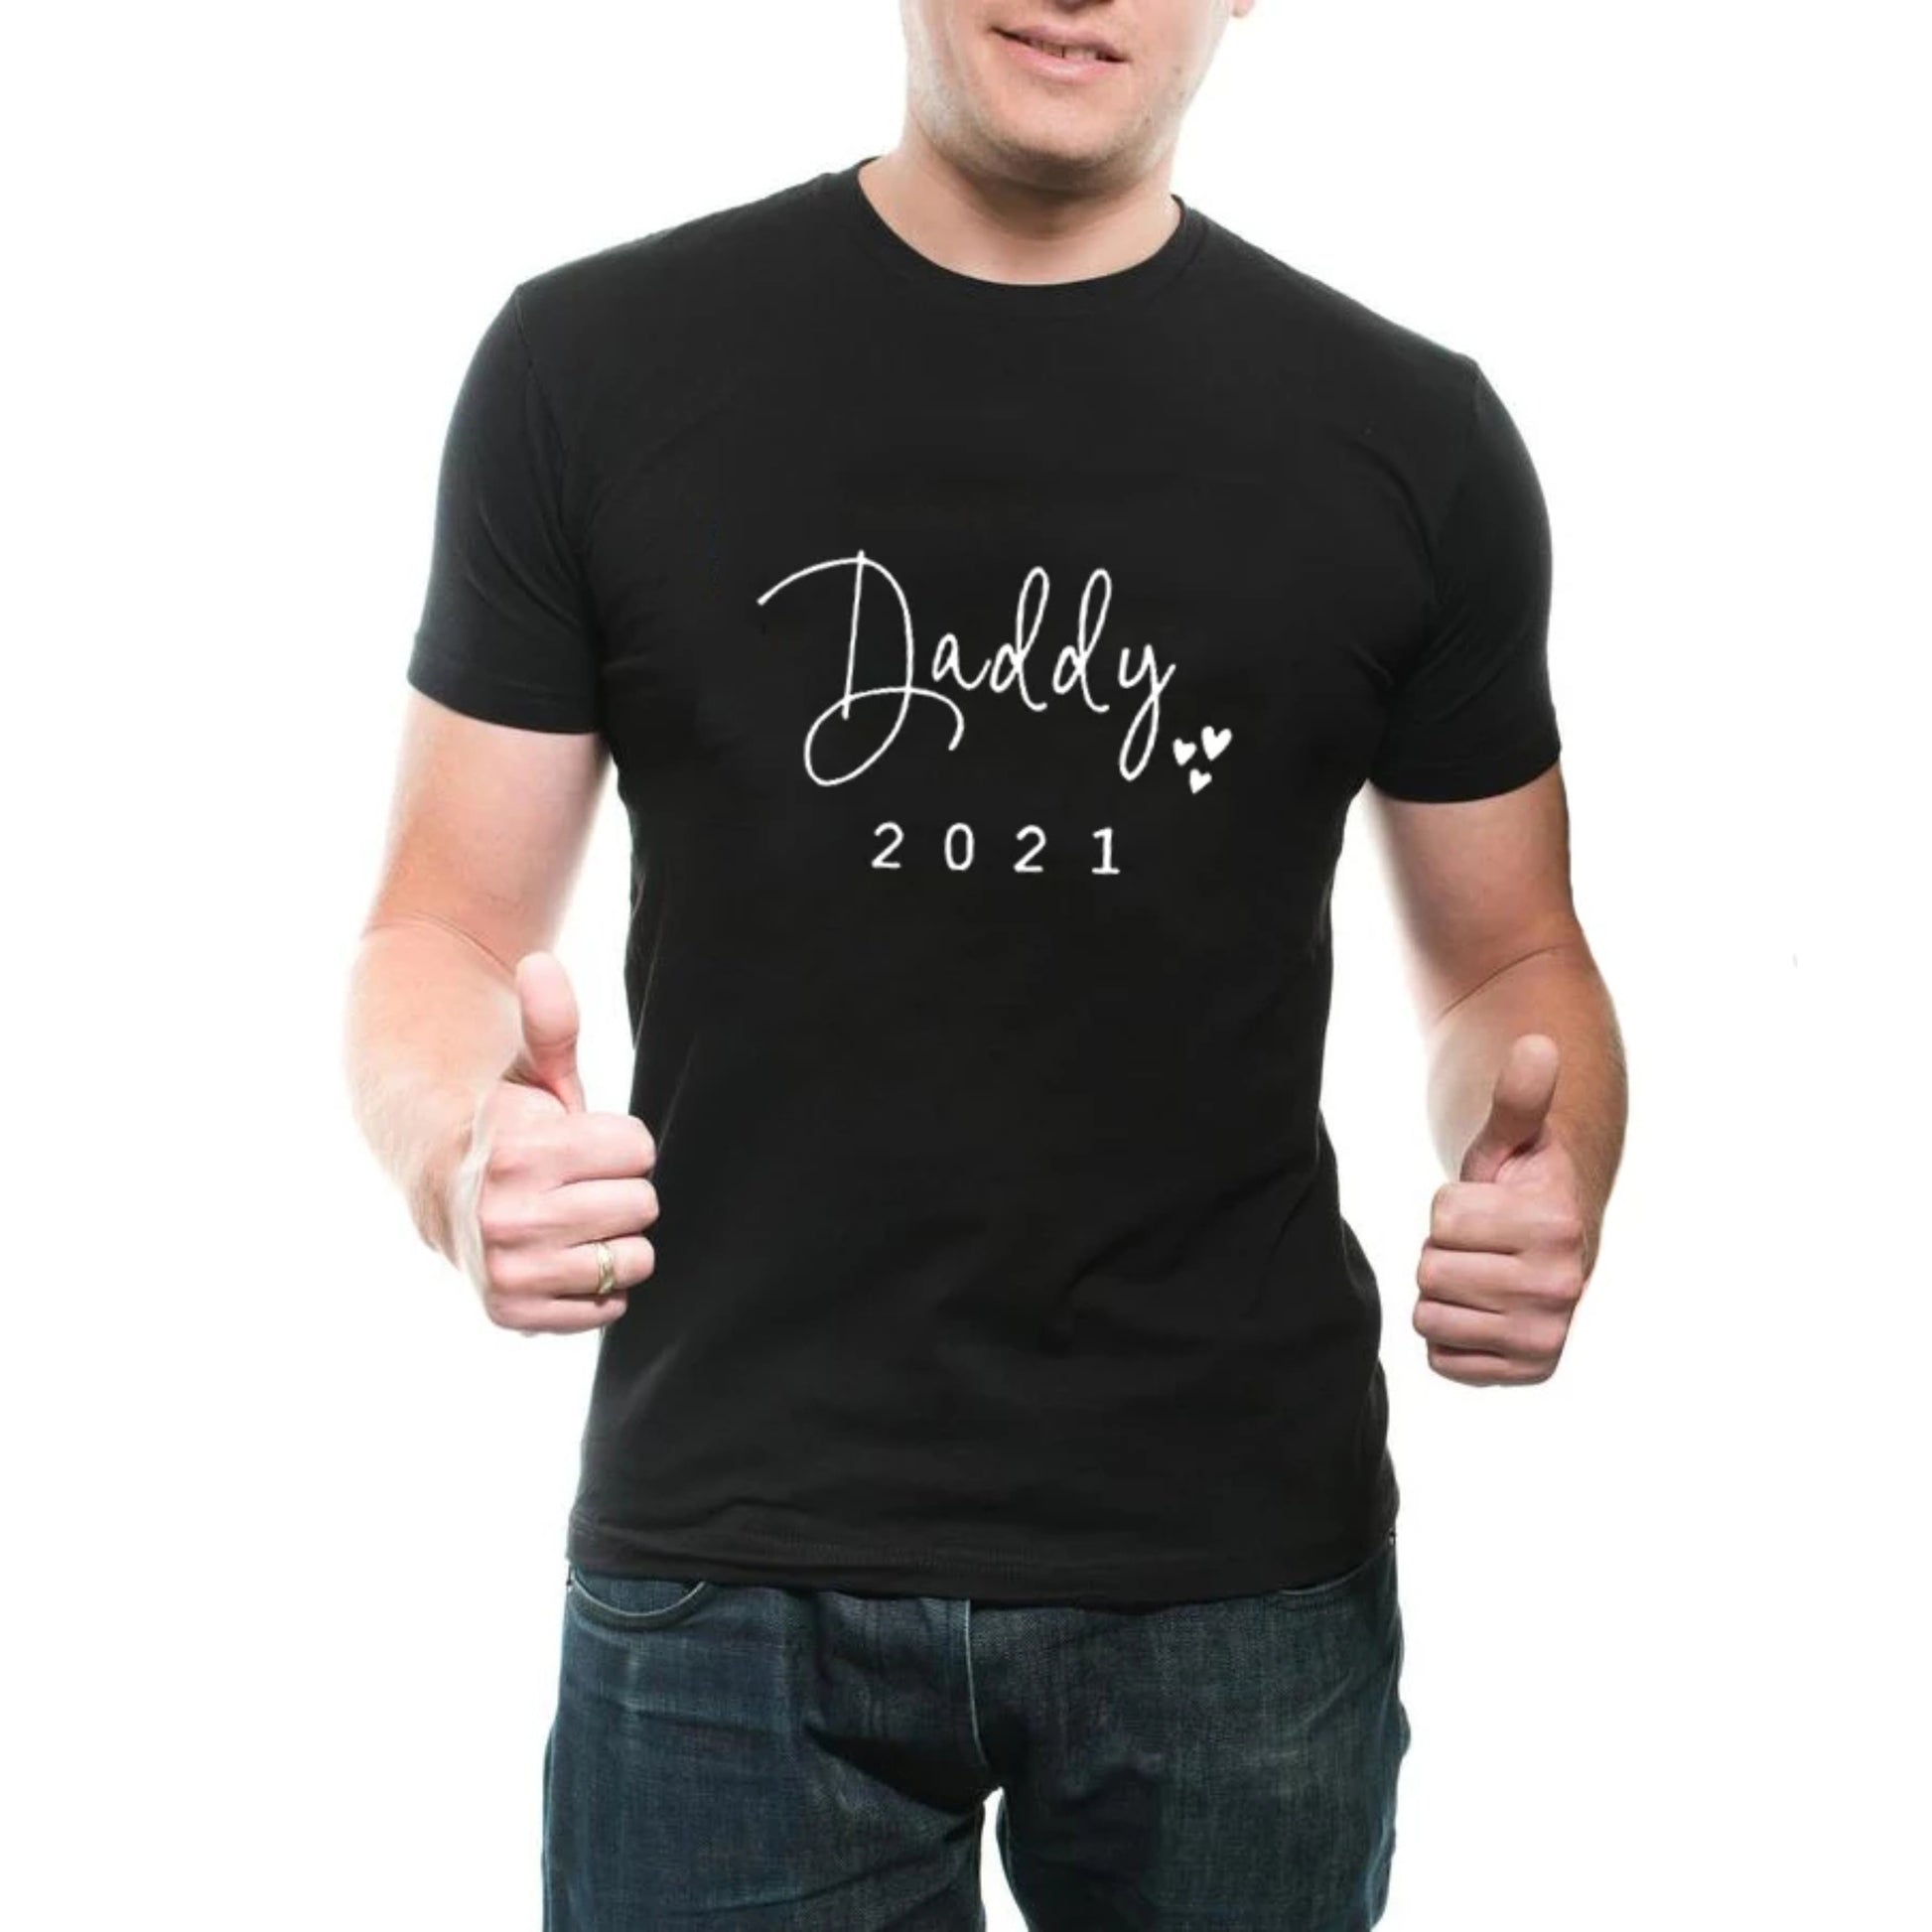 Daddy 2021 Maternity t shirts for men- Black